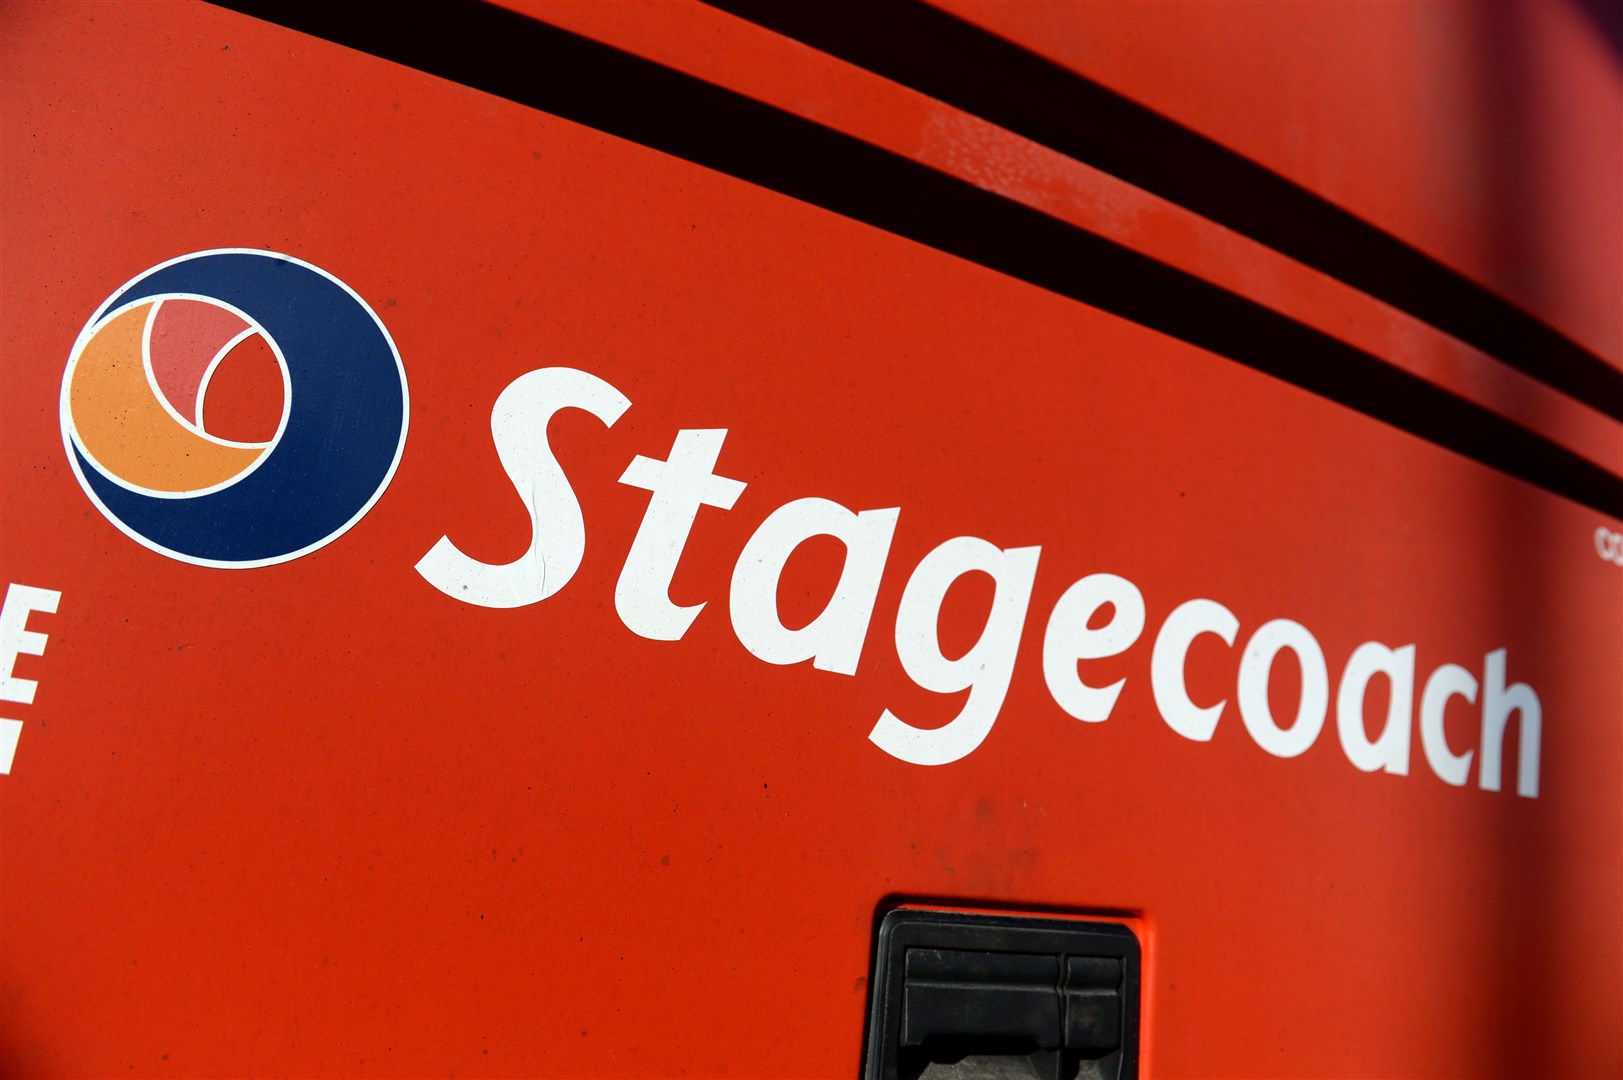 Stagecoach has faced criticism over the number of breakdowns that affect passengers.